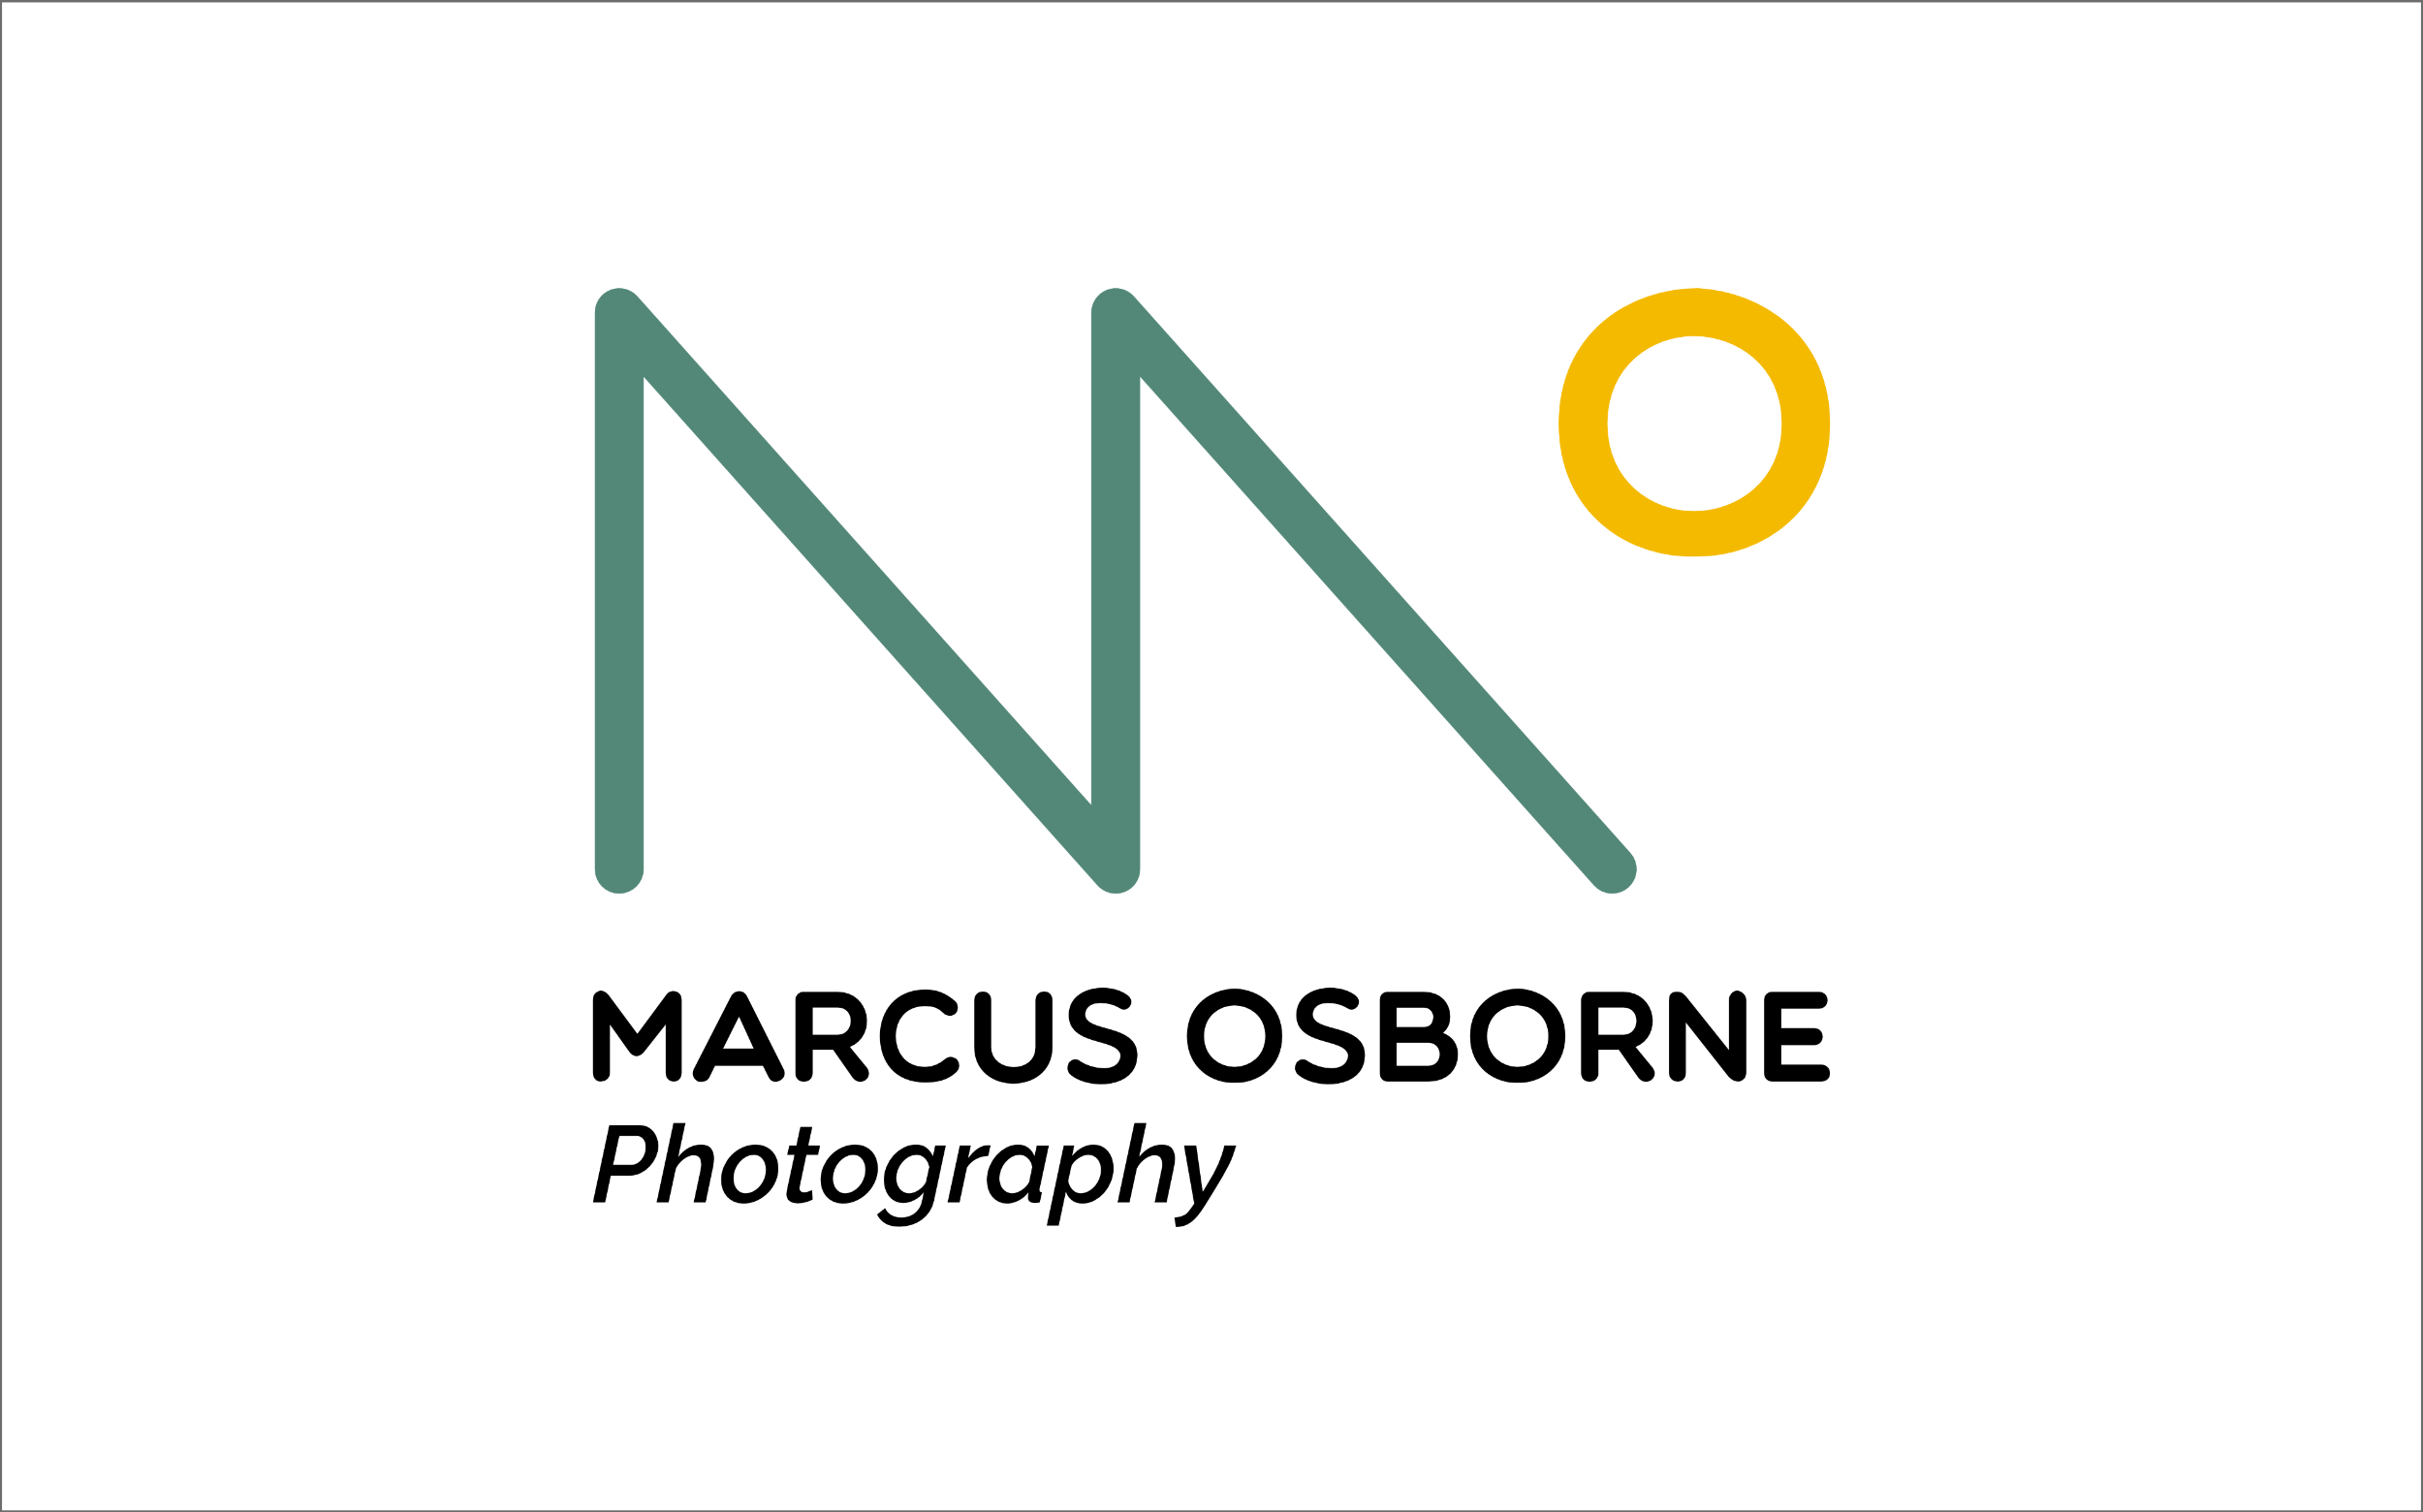 Logo Design for Marcus Osborne Photography.  Made by Jon Glanville - Plymouth Graphic Designer.